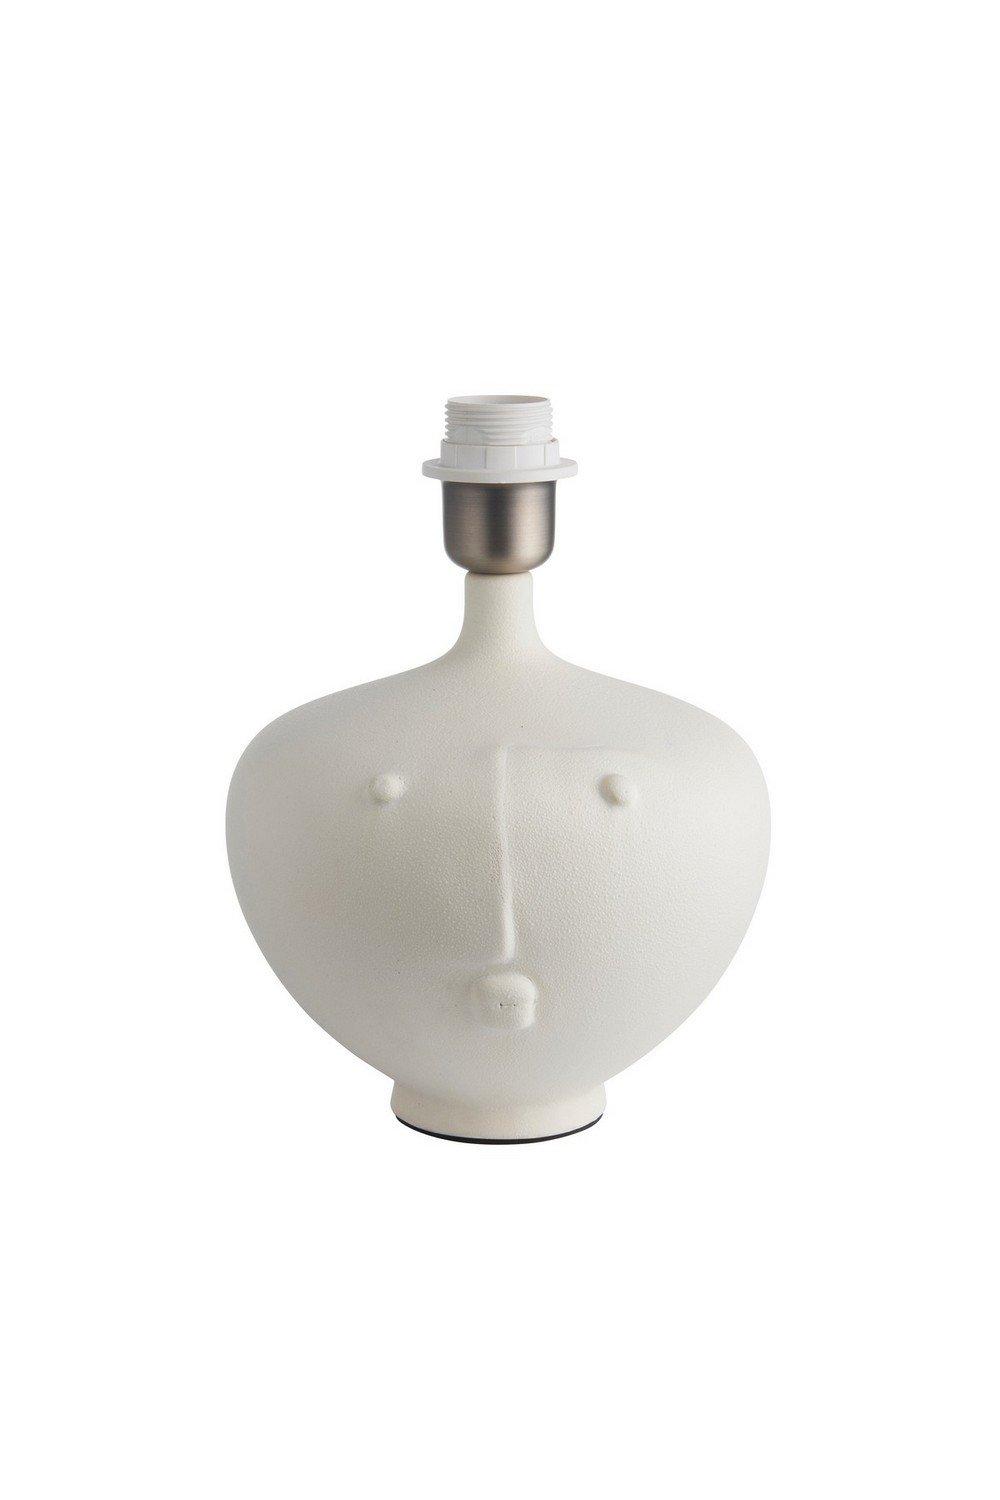 Mrs Matt white Ceramic Table Lamp Base Only with Inline Switch Heart Shape